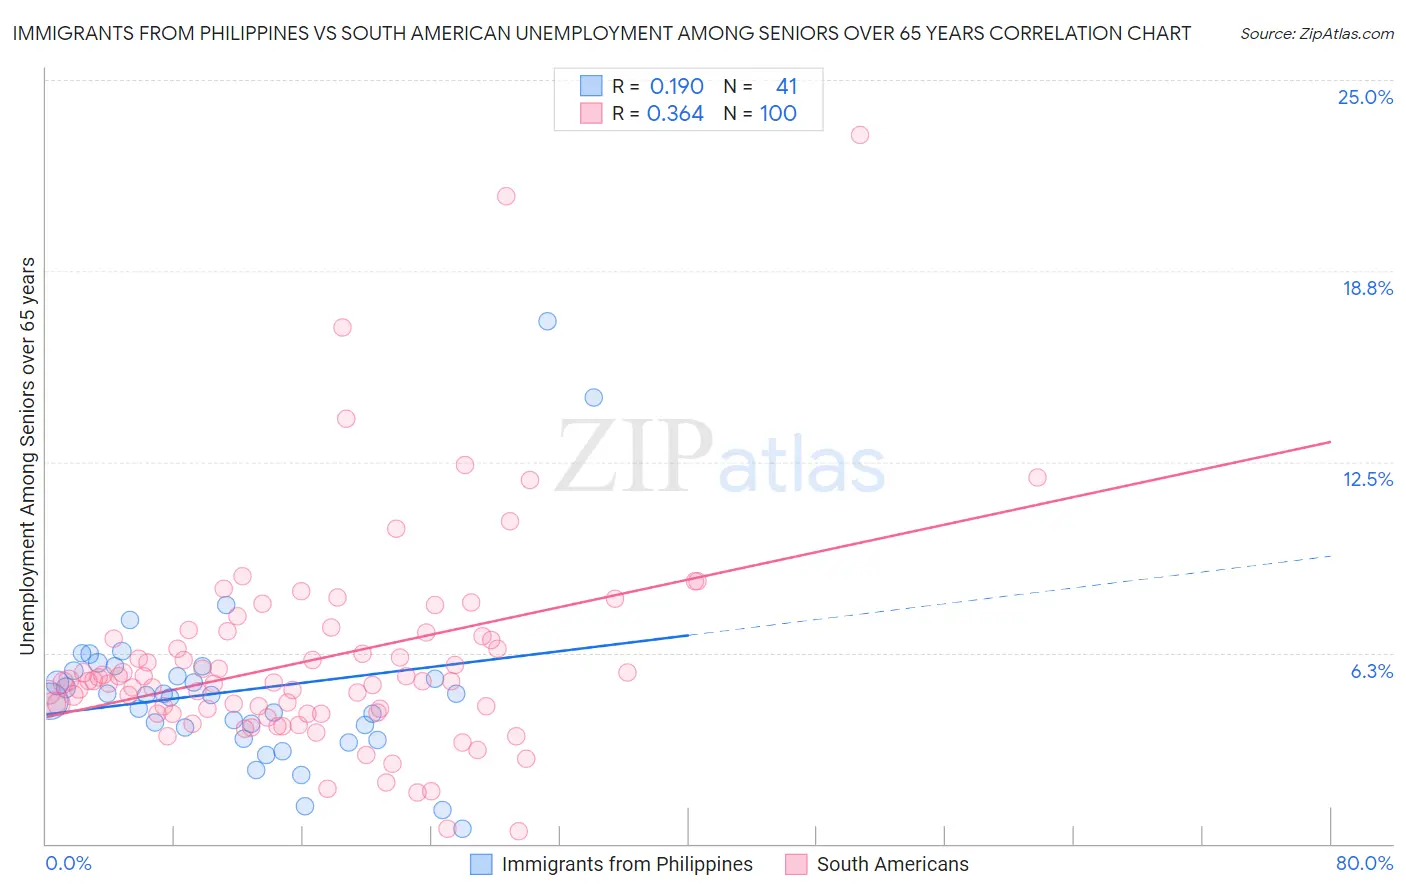 Immigrants from Philippines vs South American Unemployment Among Seniors over 65 years